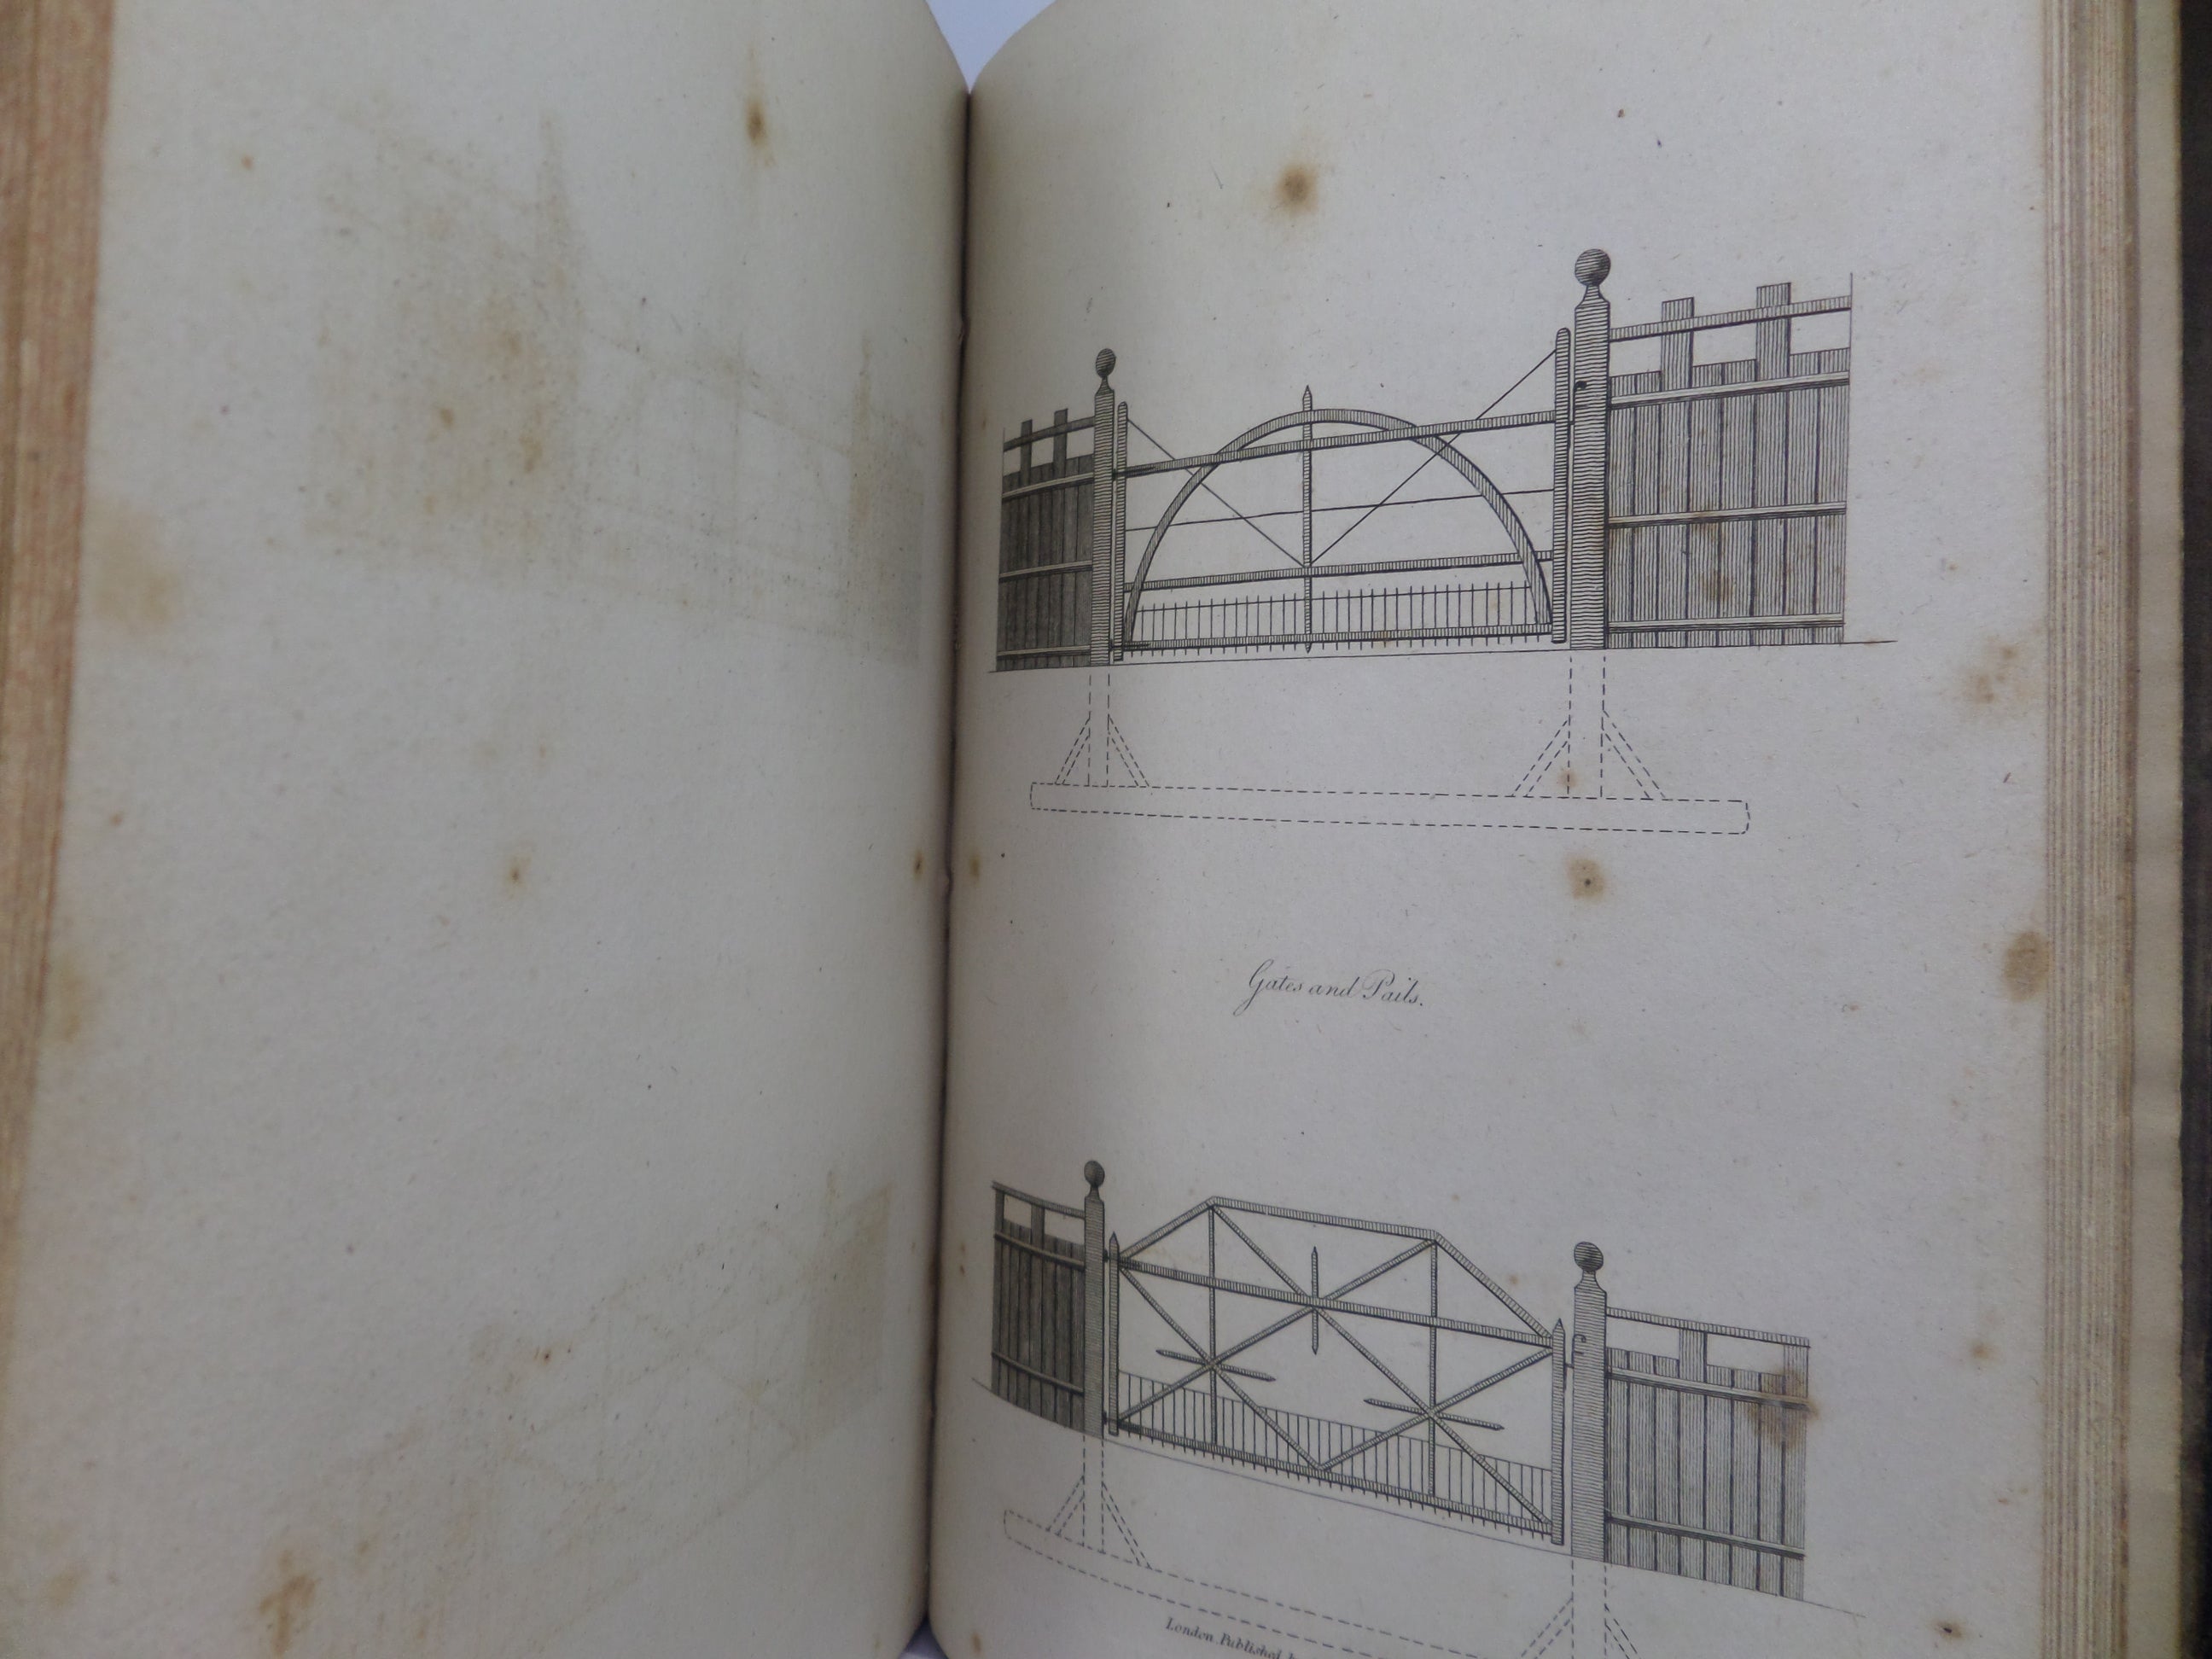 METAL WORK - PATTERN BOOKS: THE SMITH'S RIGHT HAND 1765 & DESIGNS FOR GATES 1800